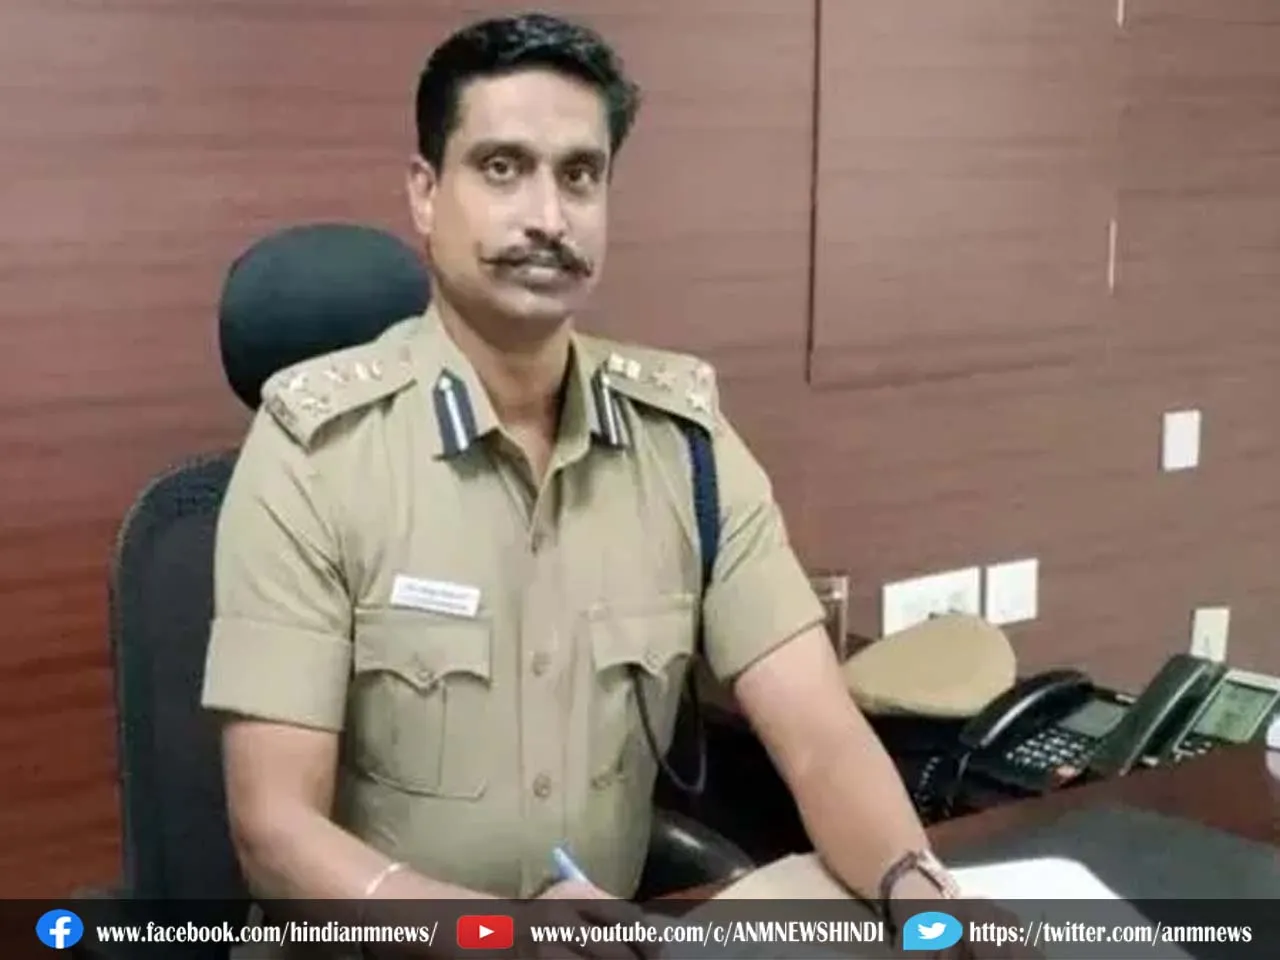 IPS officer committed suicide